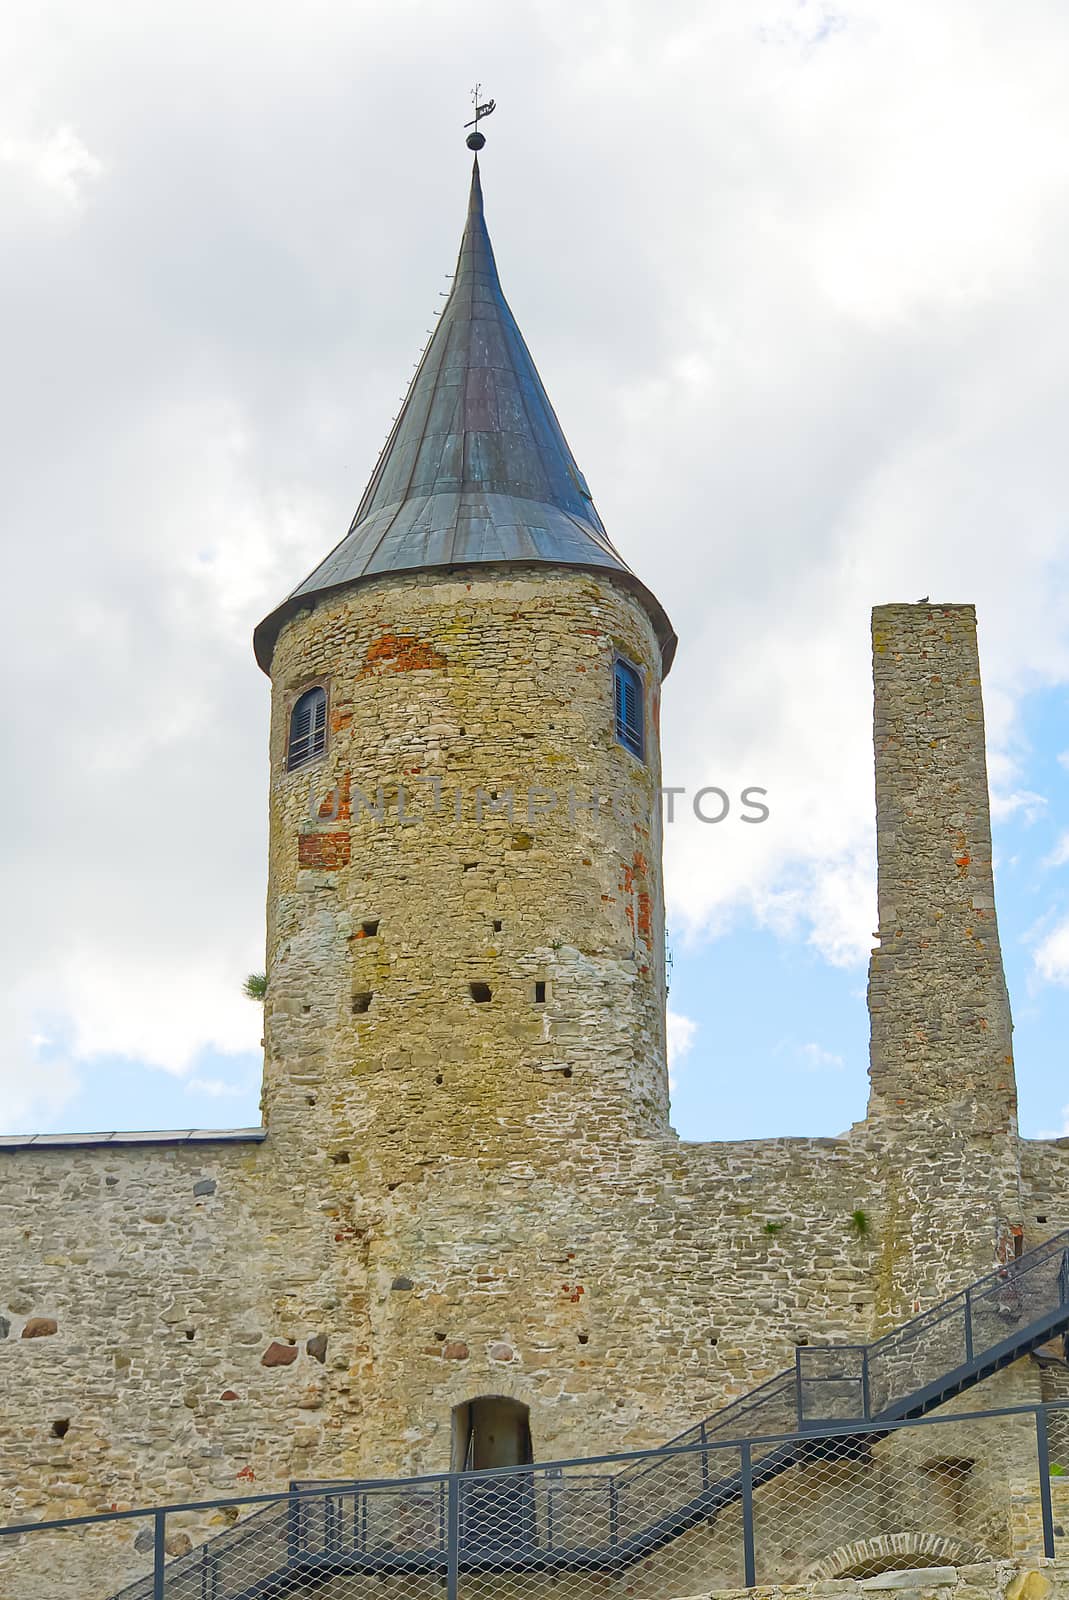 Tower of the Medieval Episcopal castle of Haapsalu city